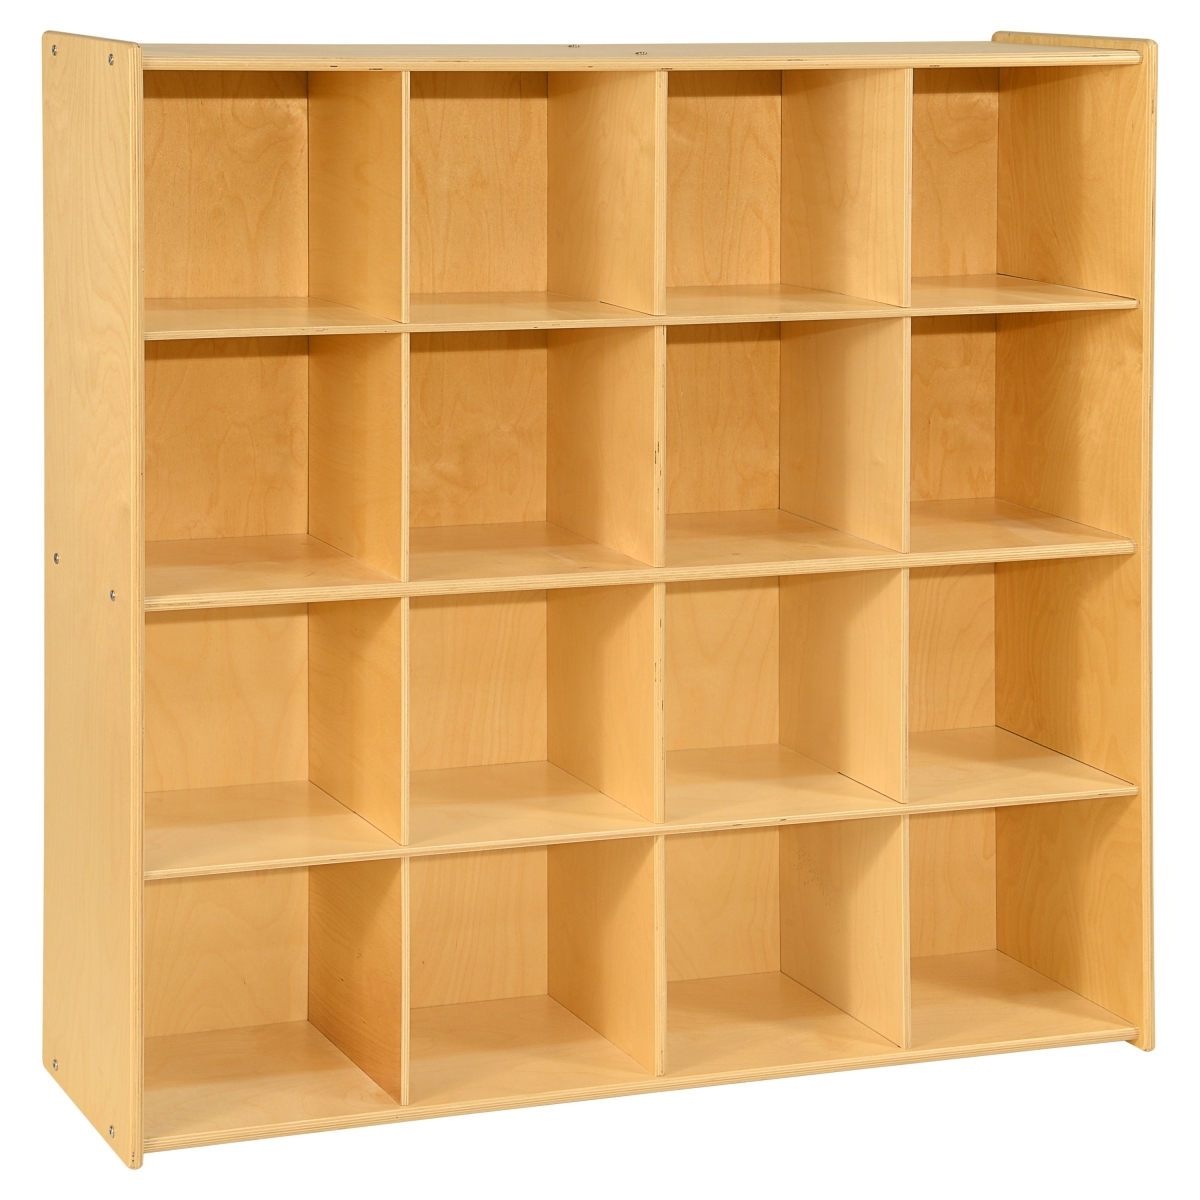 Picture of Contender C50916F Big Cubby Storage with 16 Cubbies - Assembled